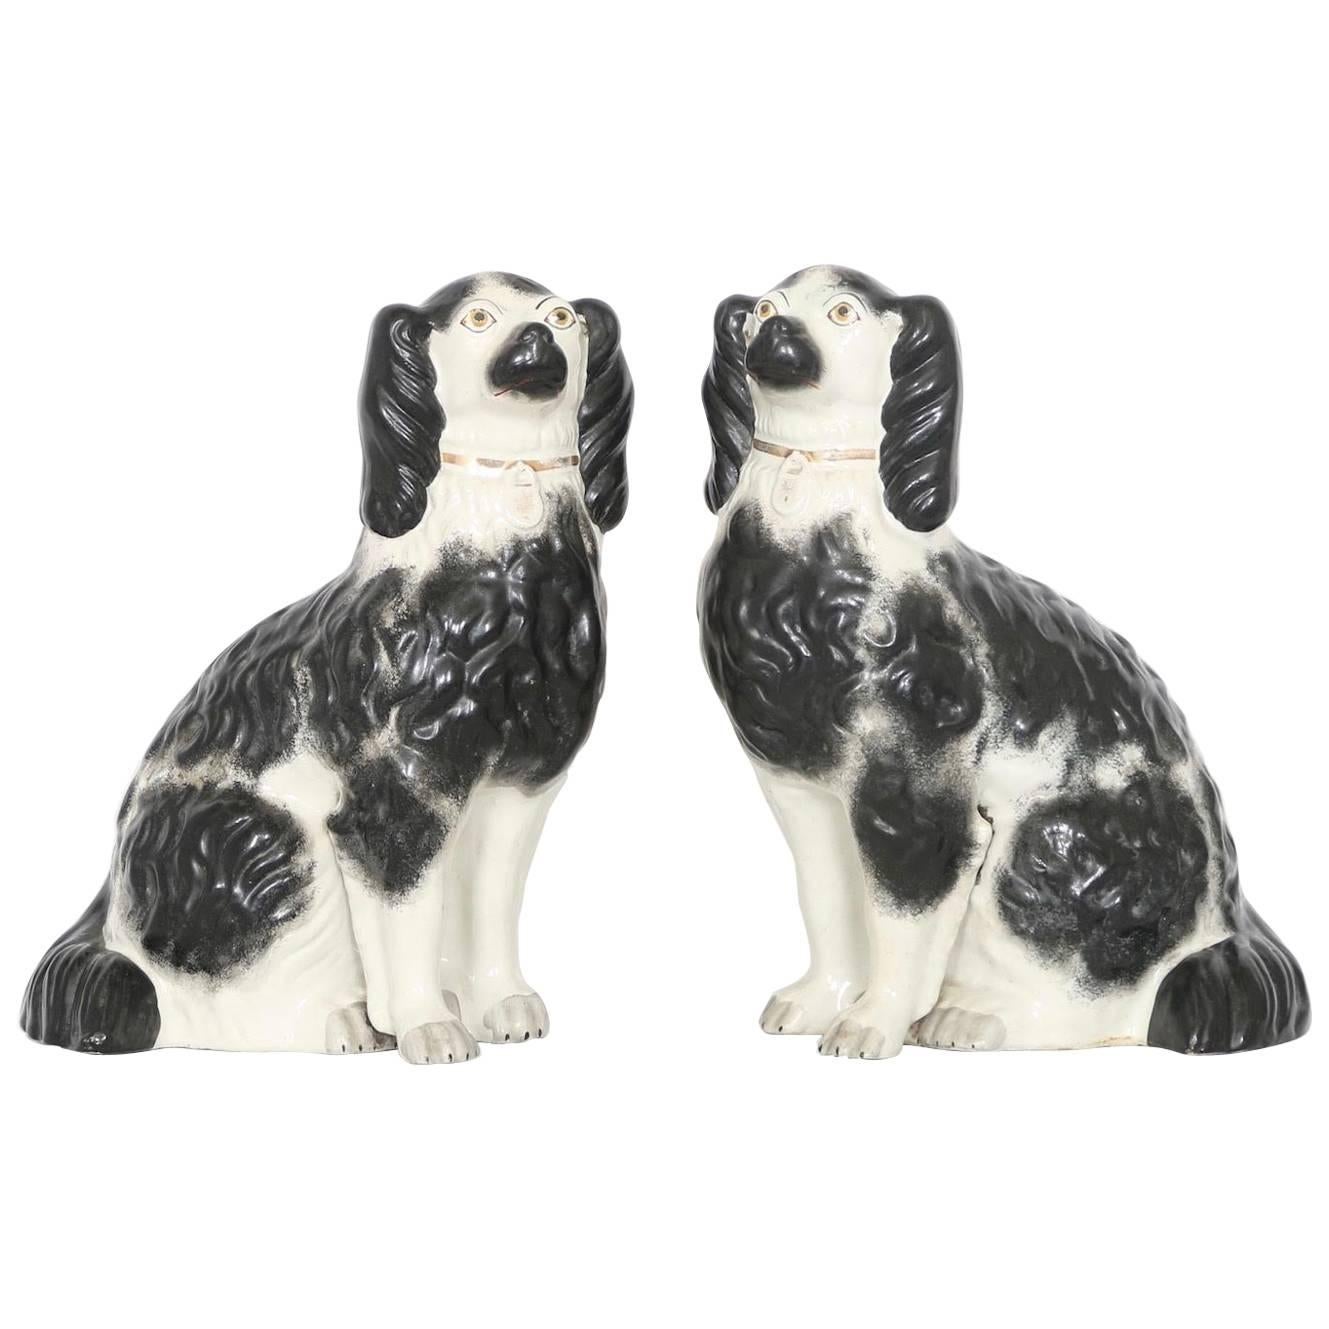 Large Pair of Staffordshire Hand-Painted Porcelain Dog Figurines